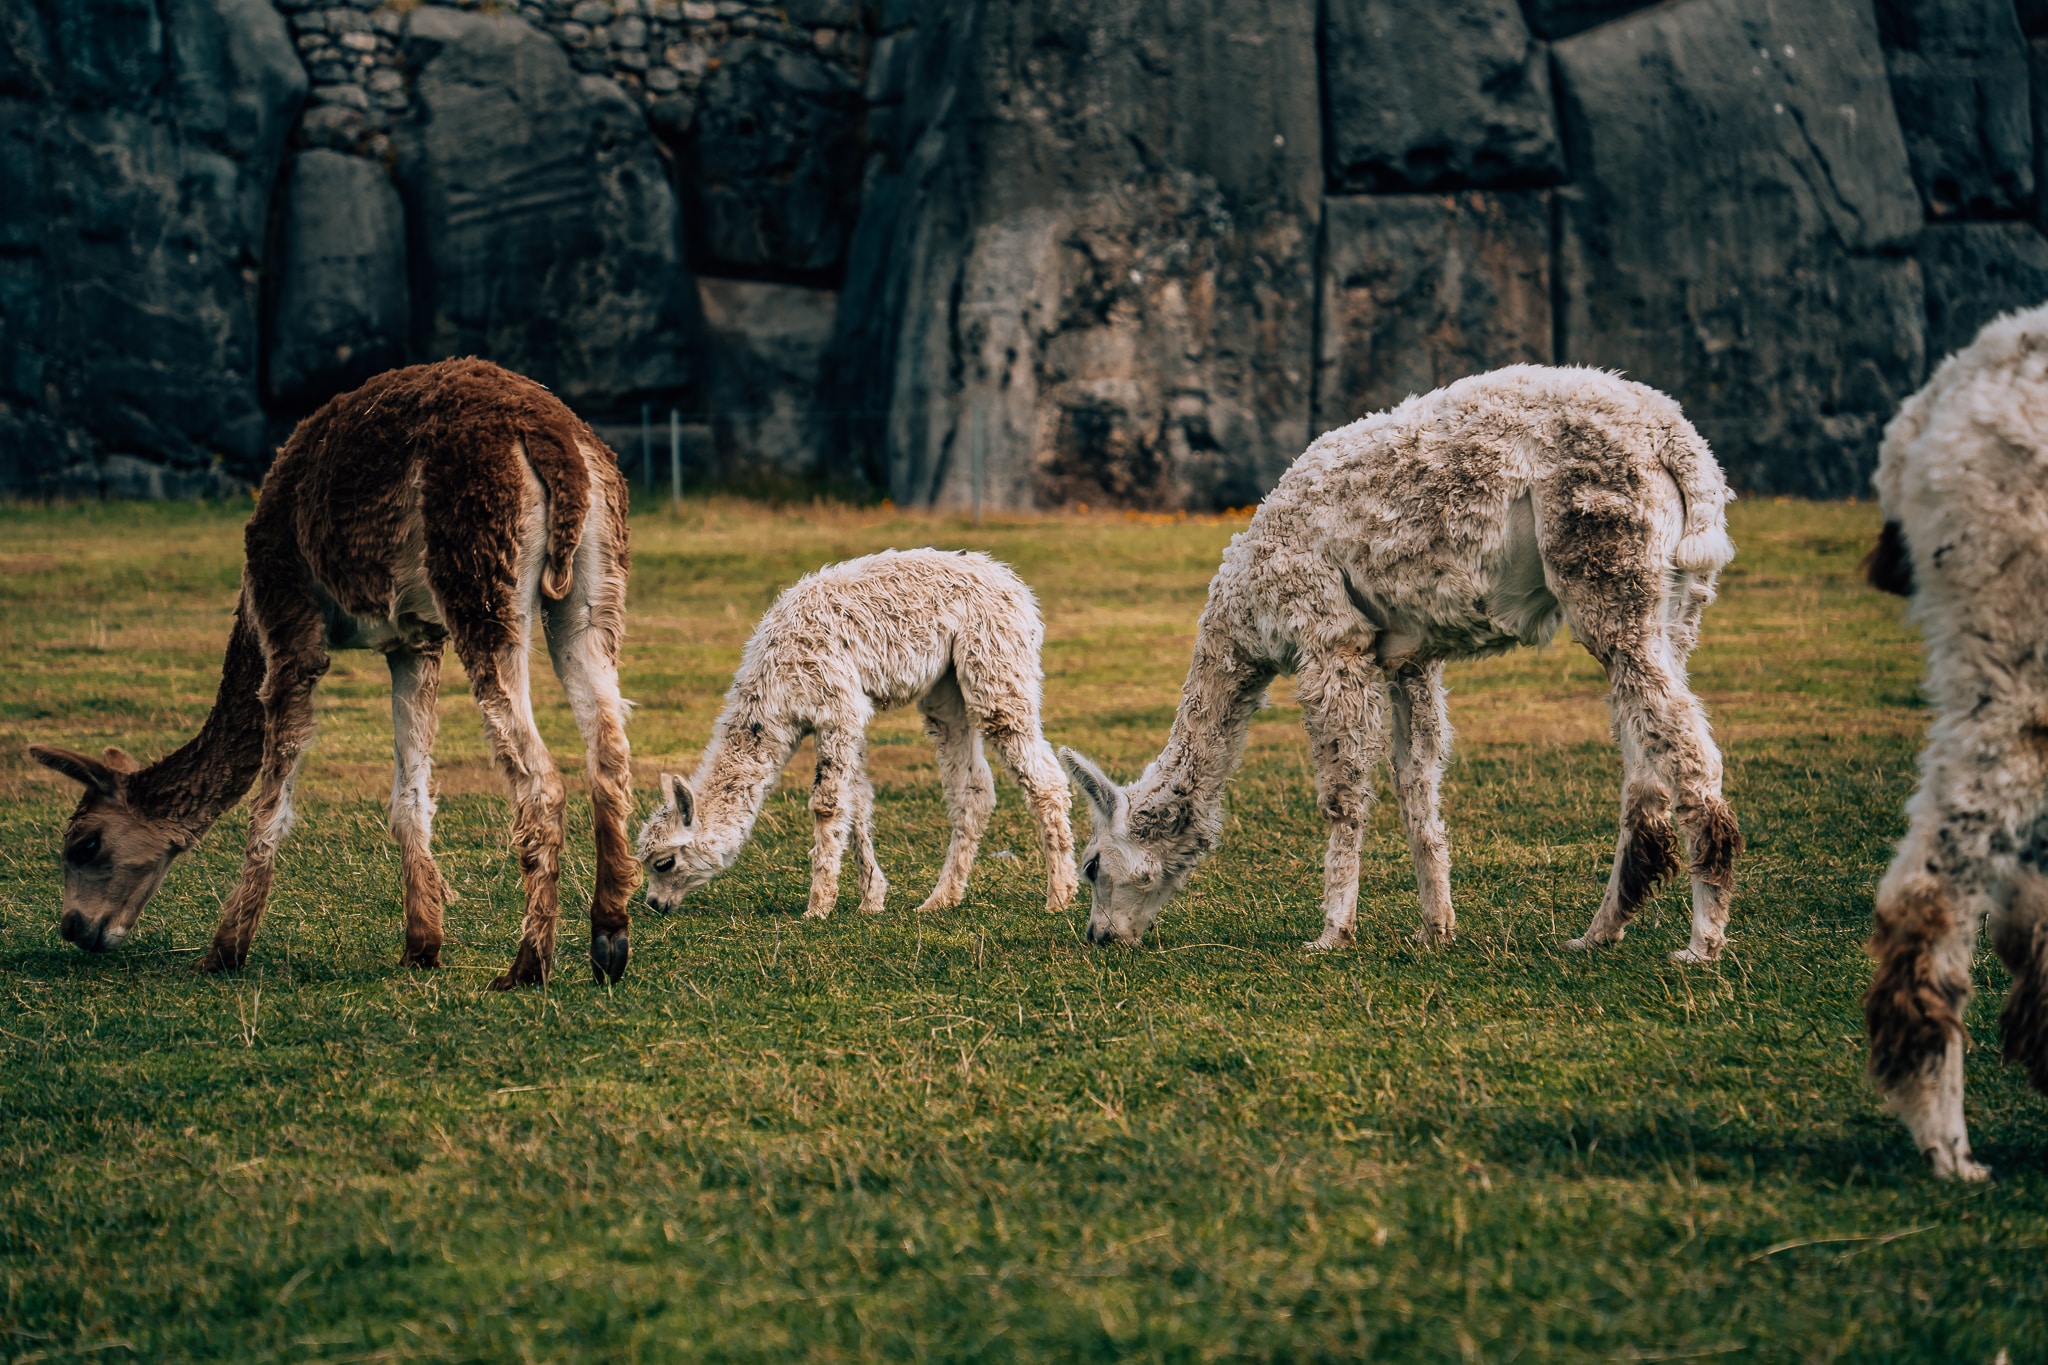 3 adult alpacas and a baby alpaca eating grass at Sacsayhuaman in Peru